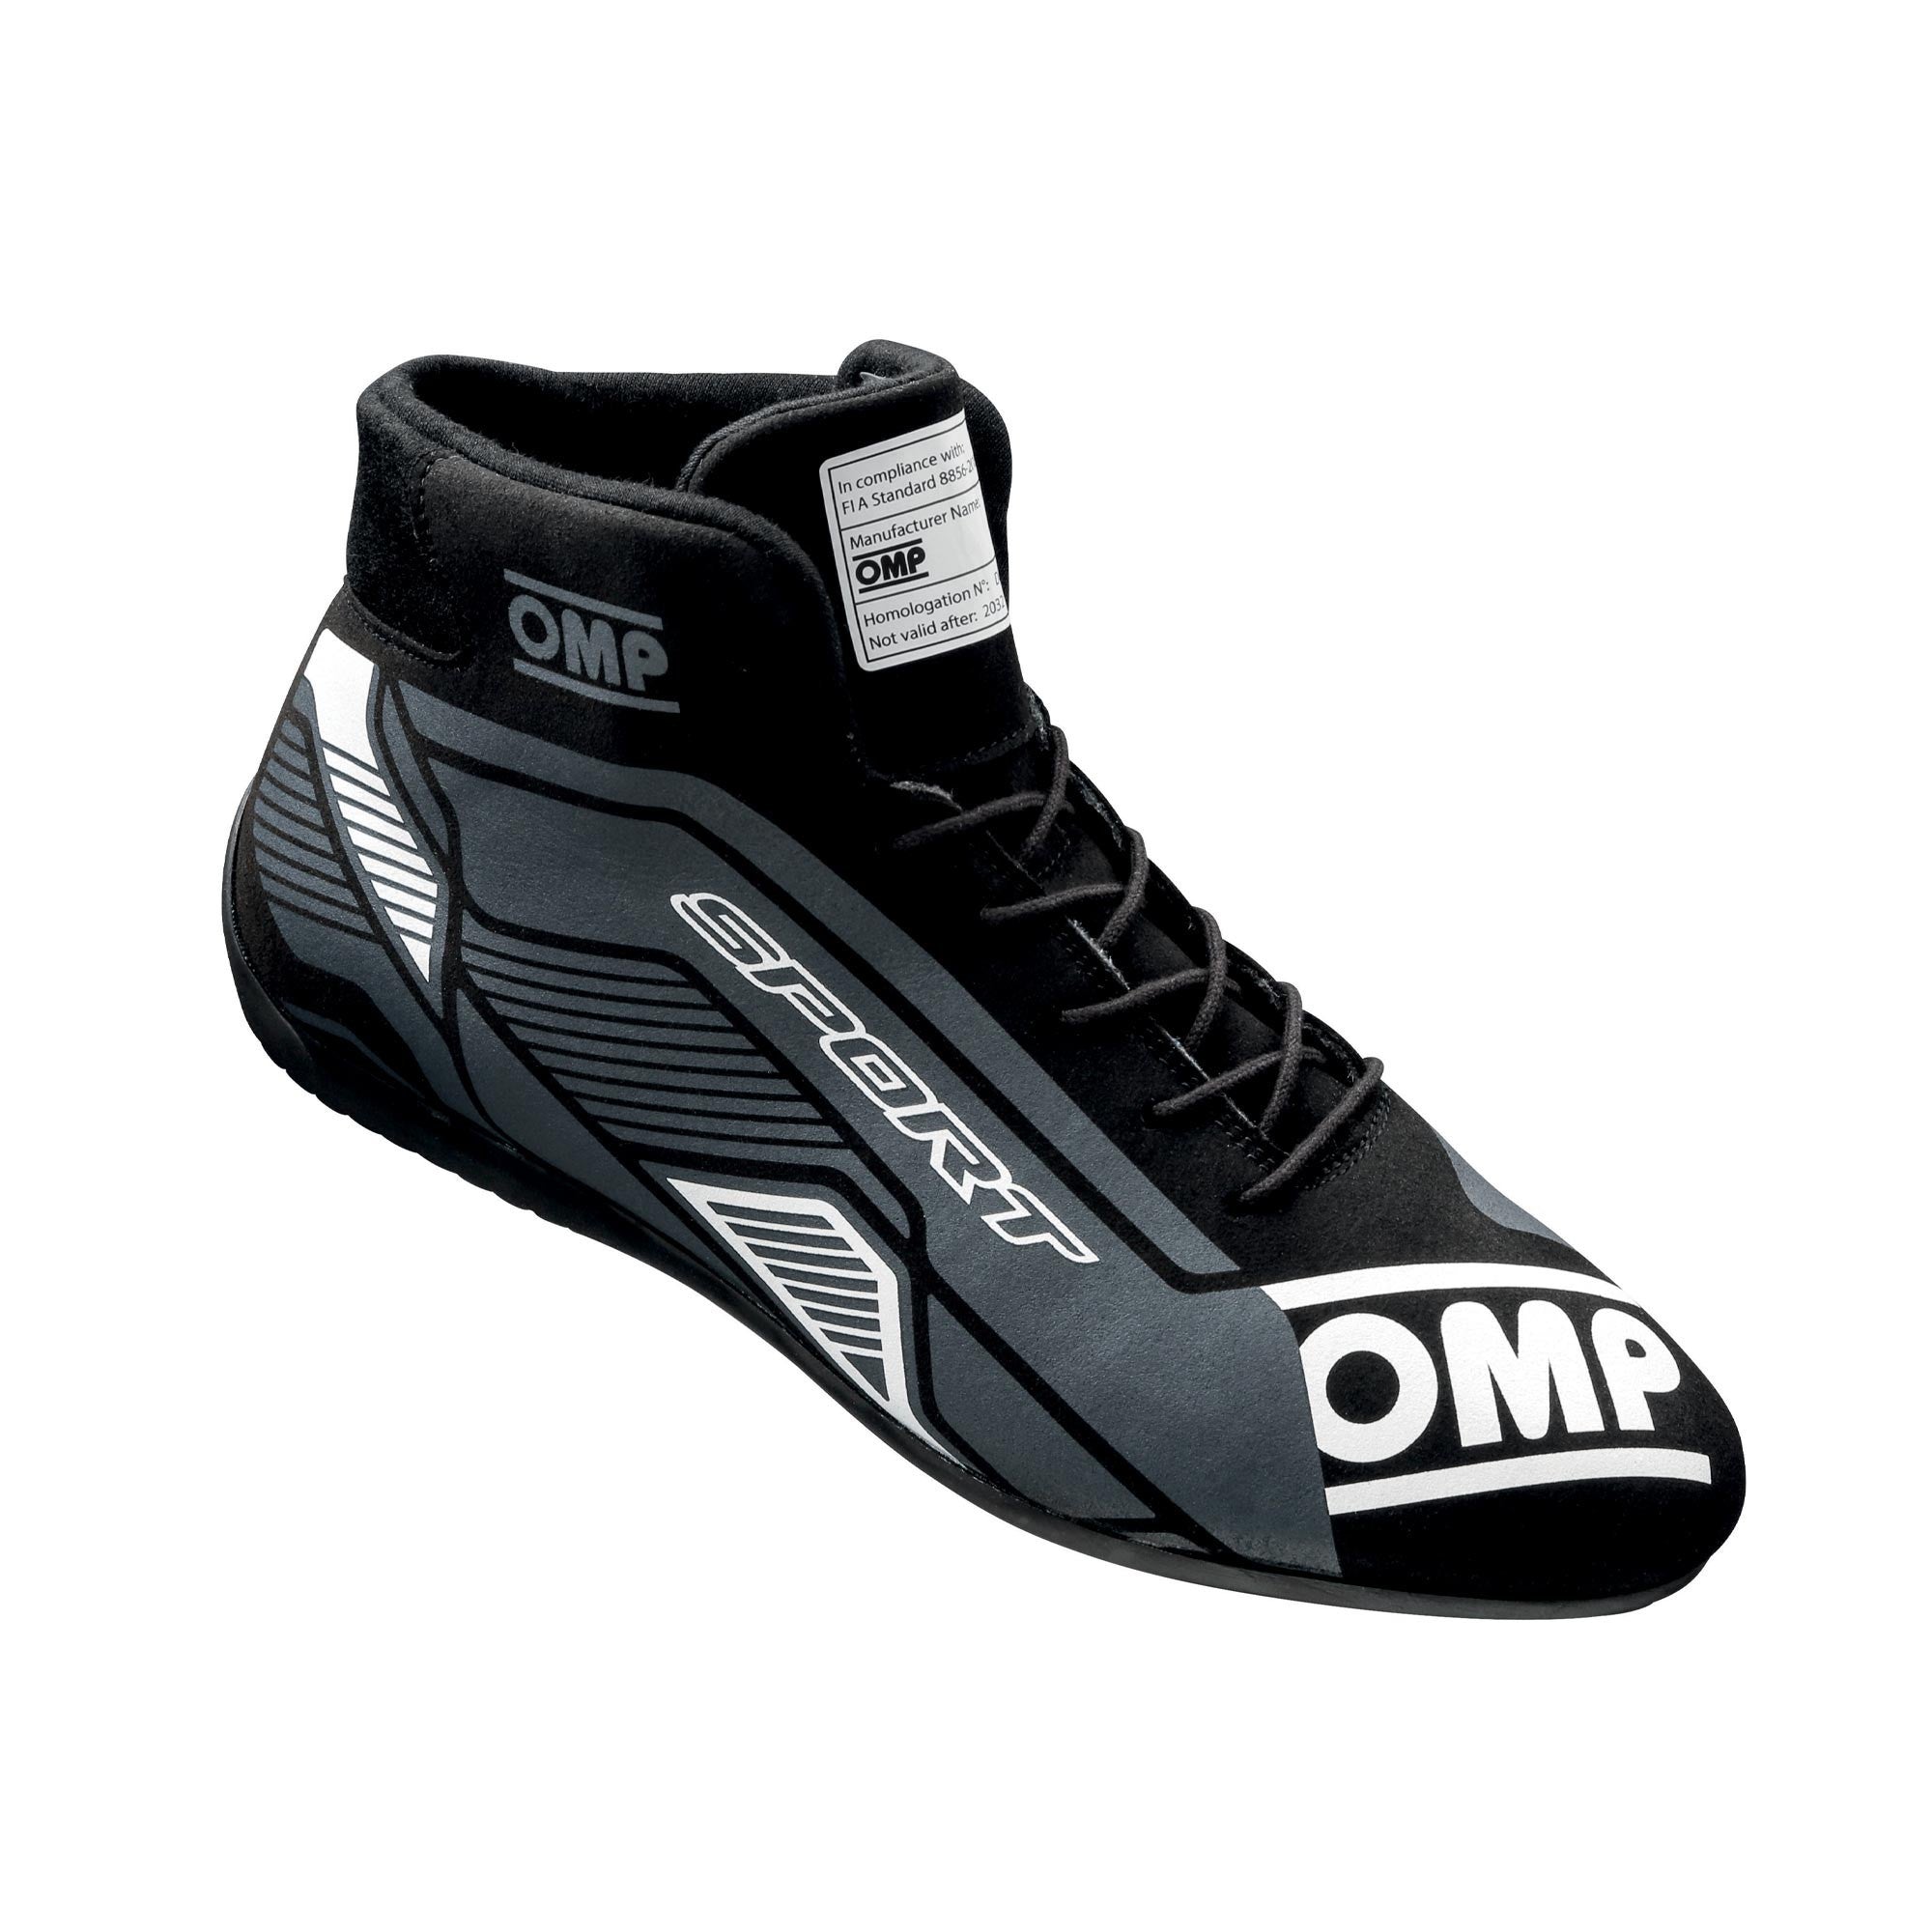 OMP OMP SPORT SHOES FIA 8856 -2018 BLACK / WHITE SZ. Safety Clothing Driving Shoes and Boots main image